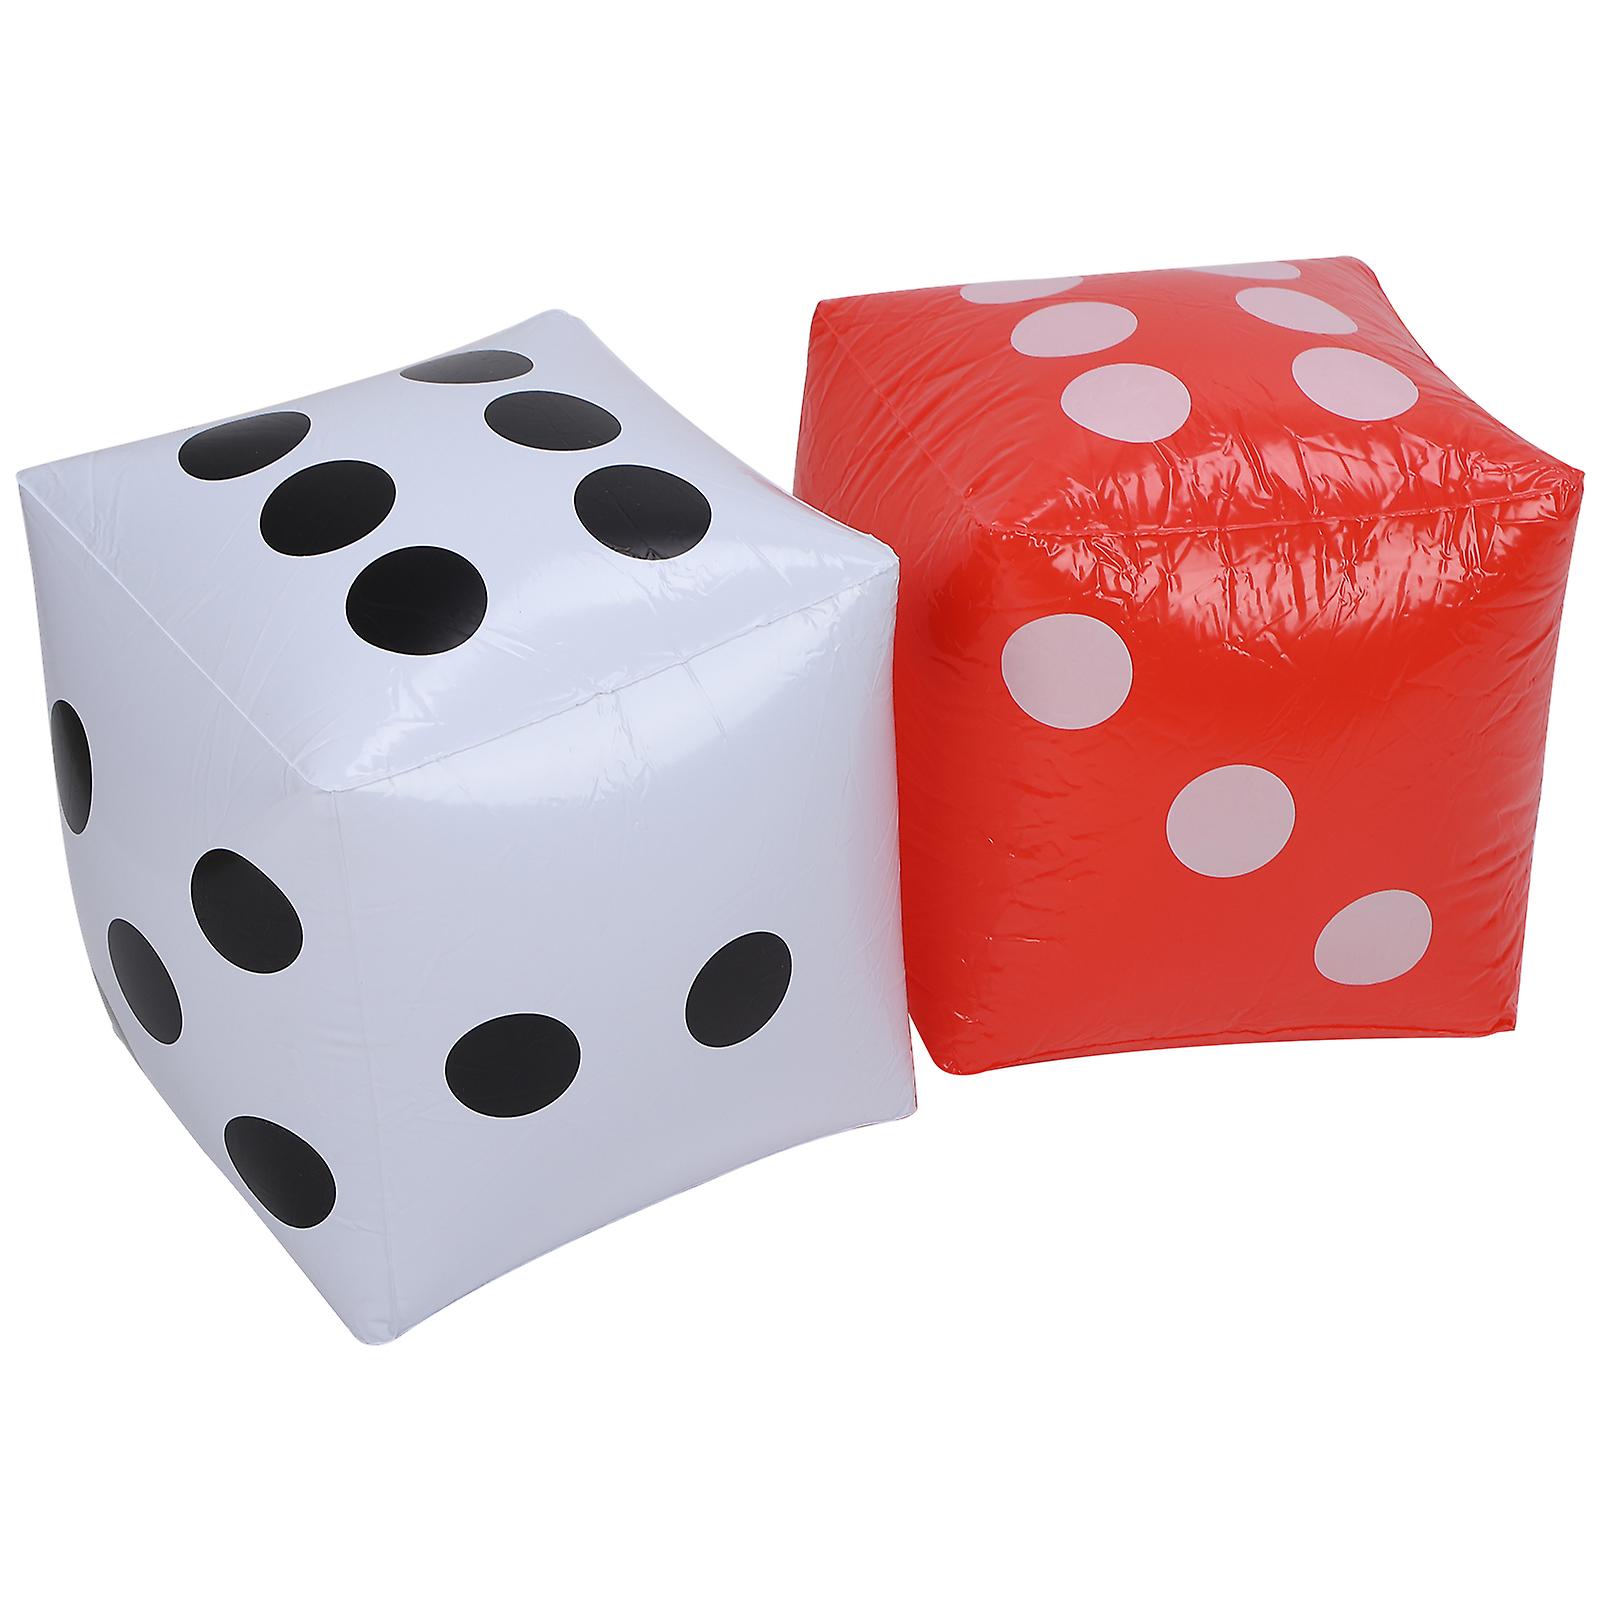 Dice Balloon Party Outdoor Toy Pvc Inflatable Education Craft Supplies Red White